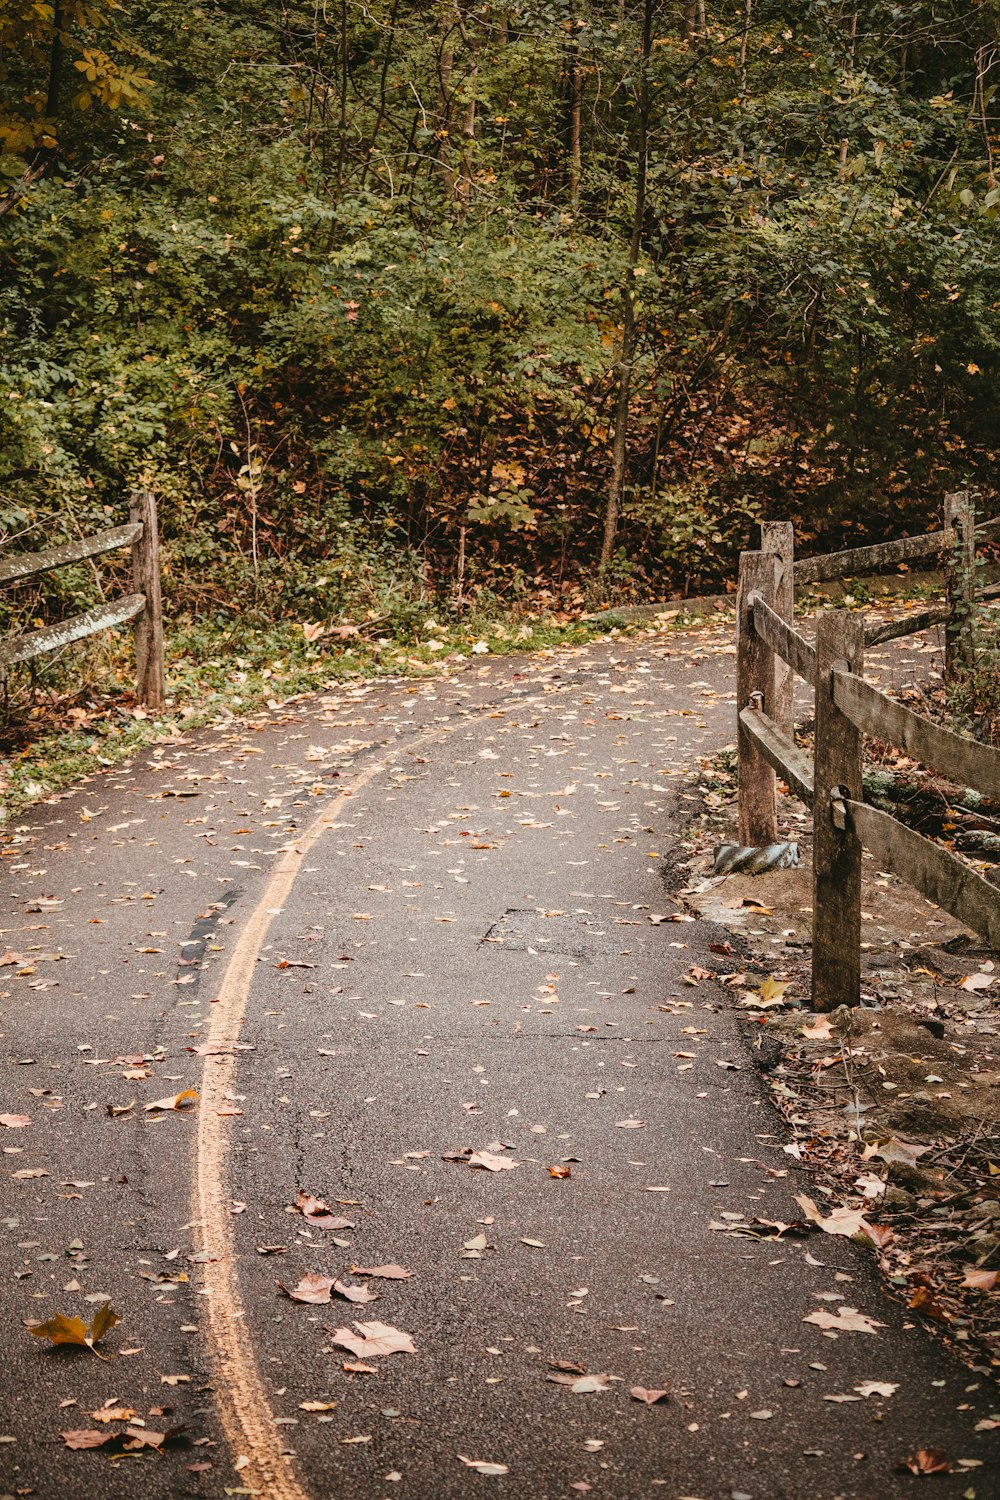 a winding road with a wooden fence and trees in the background